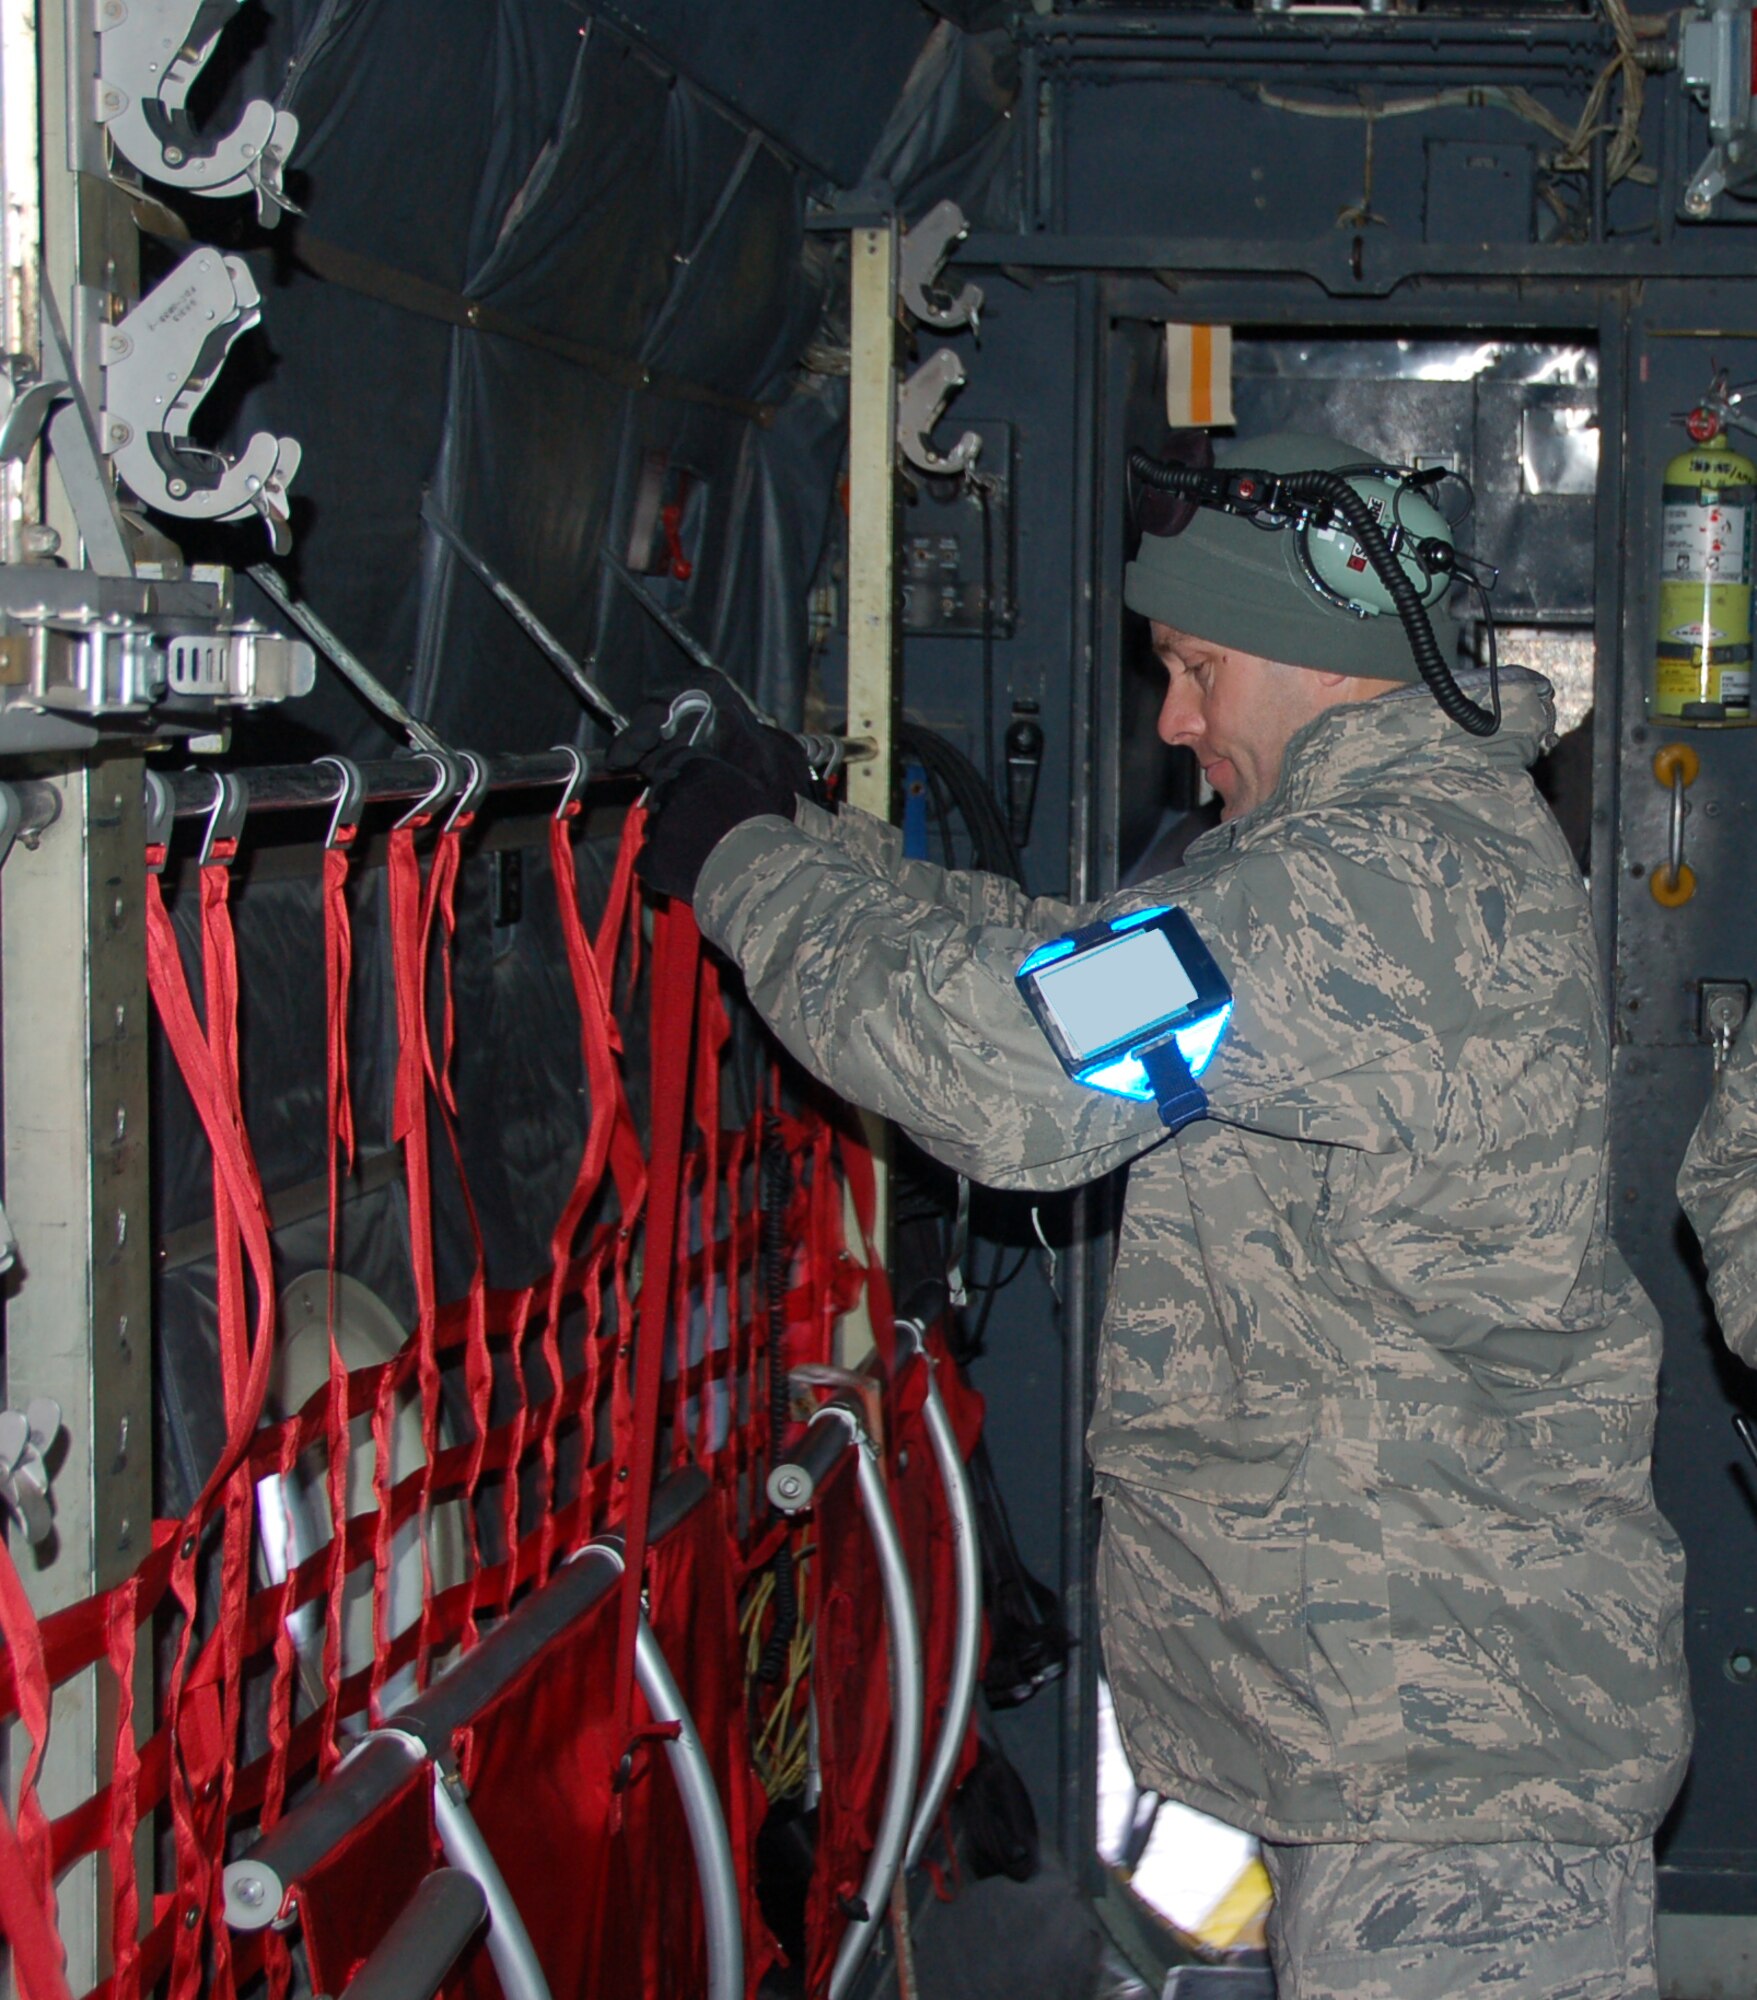 Technical Sgt. Ernest Descheneaux, a crew chief assigned to the 103rd Maintenance Group, completes pre-flight preparations before the first locally-generated sortie aboard a C-130H Hercules aircraft Dec. 19, 2013, at Bradley Air National Guard Base, East Granby, Conn.  The aircrew was comprised of Airmen from the Connecticut Air National Guard, the New York Air National Guard and the U.S.A.F.  (U.S. Air National Guard photo by Maj. Bryon Turner)